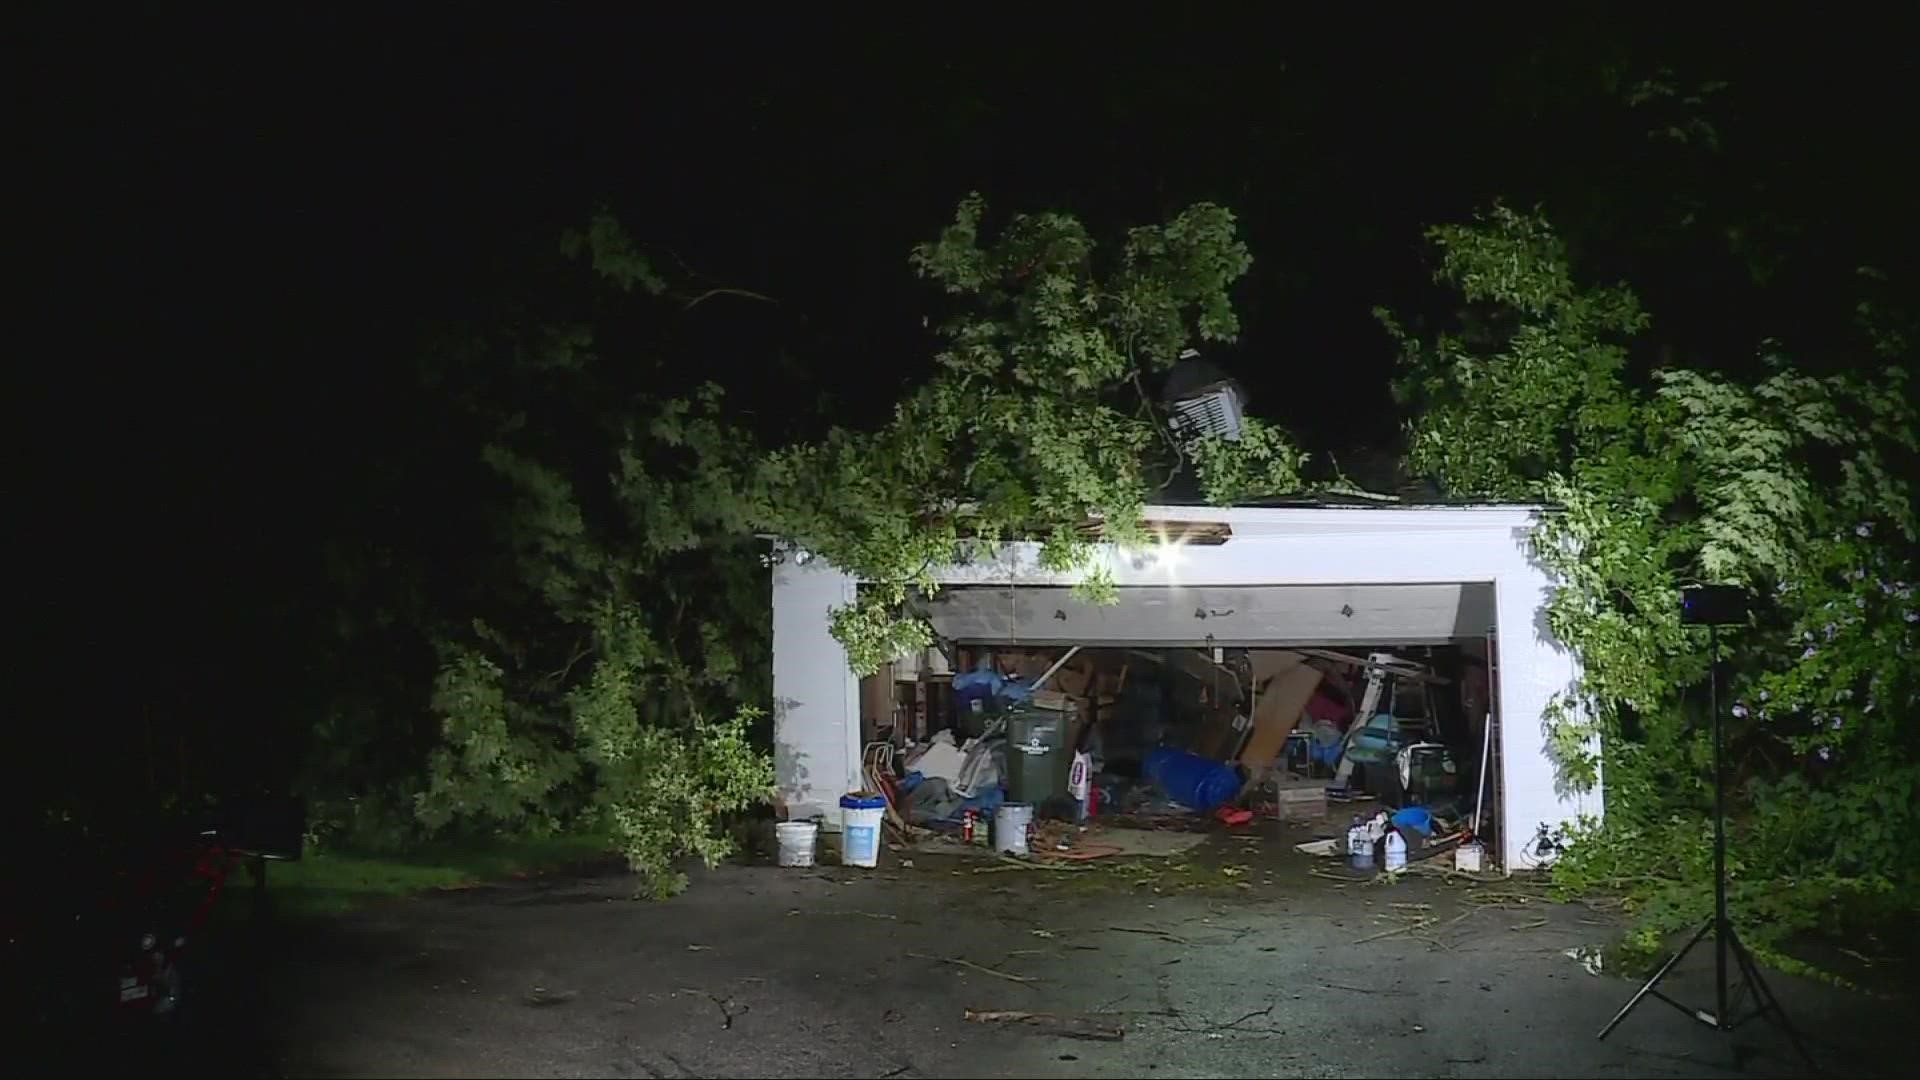 3News learned that a tree crashed into a house overnight in WIlloughby Hills. No one was injured.